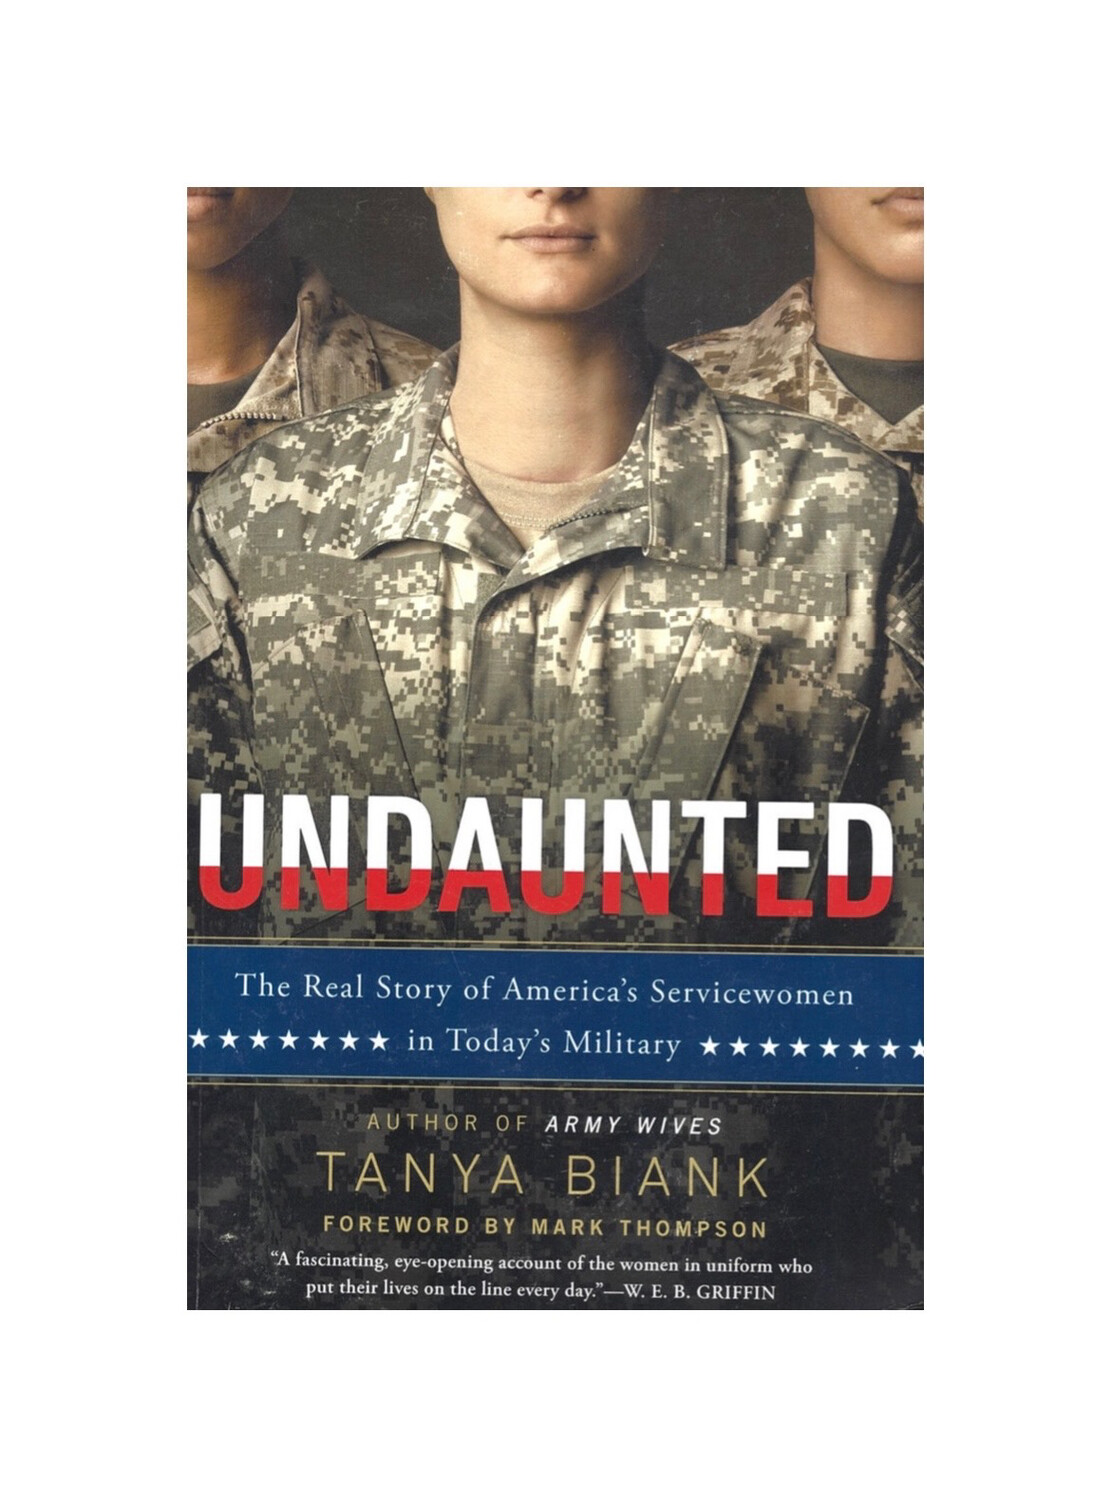 Undaunted: The Real Story of America's Servicewomen in Today's Military by Tanya Biank